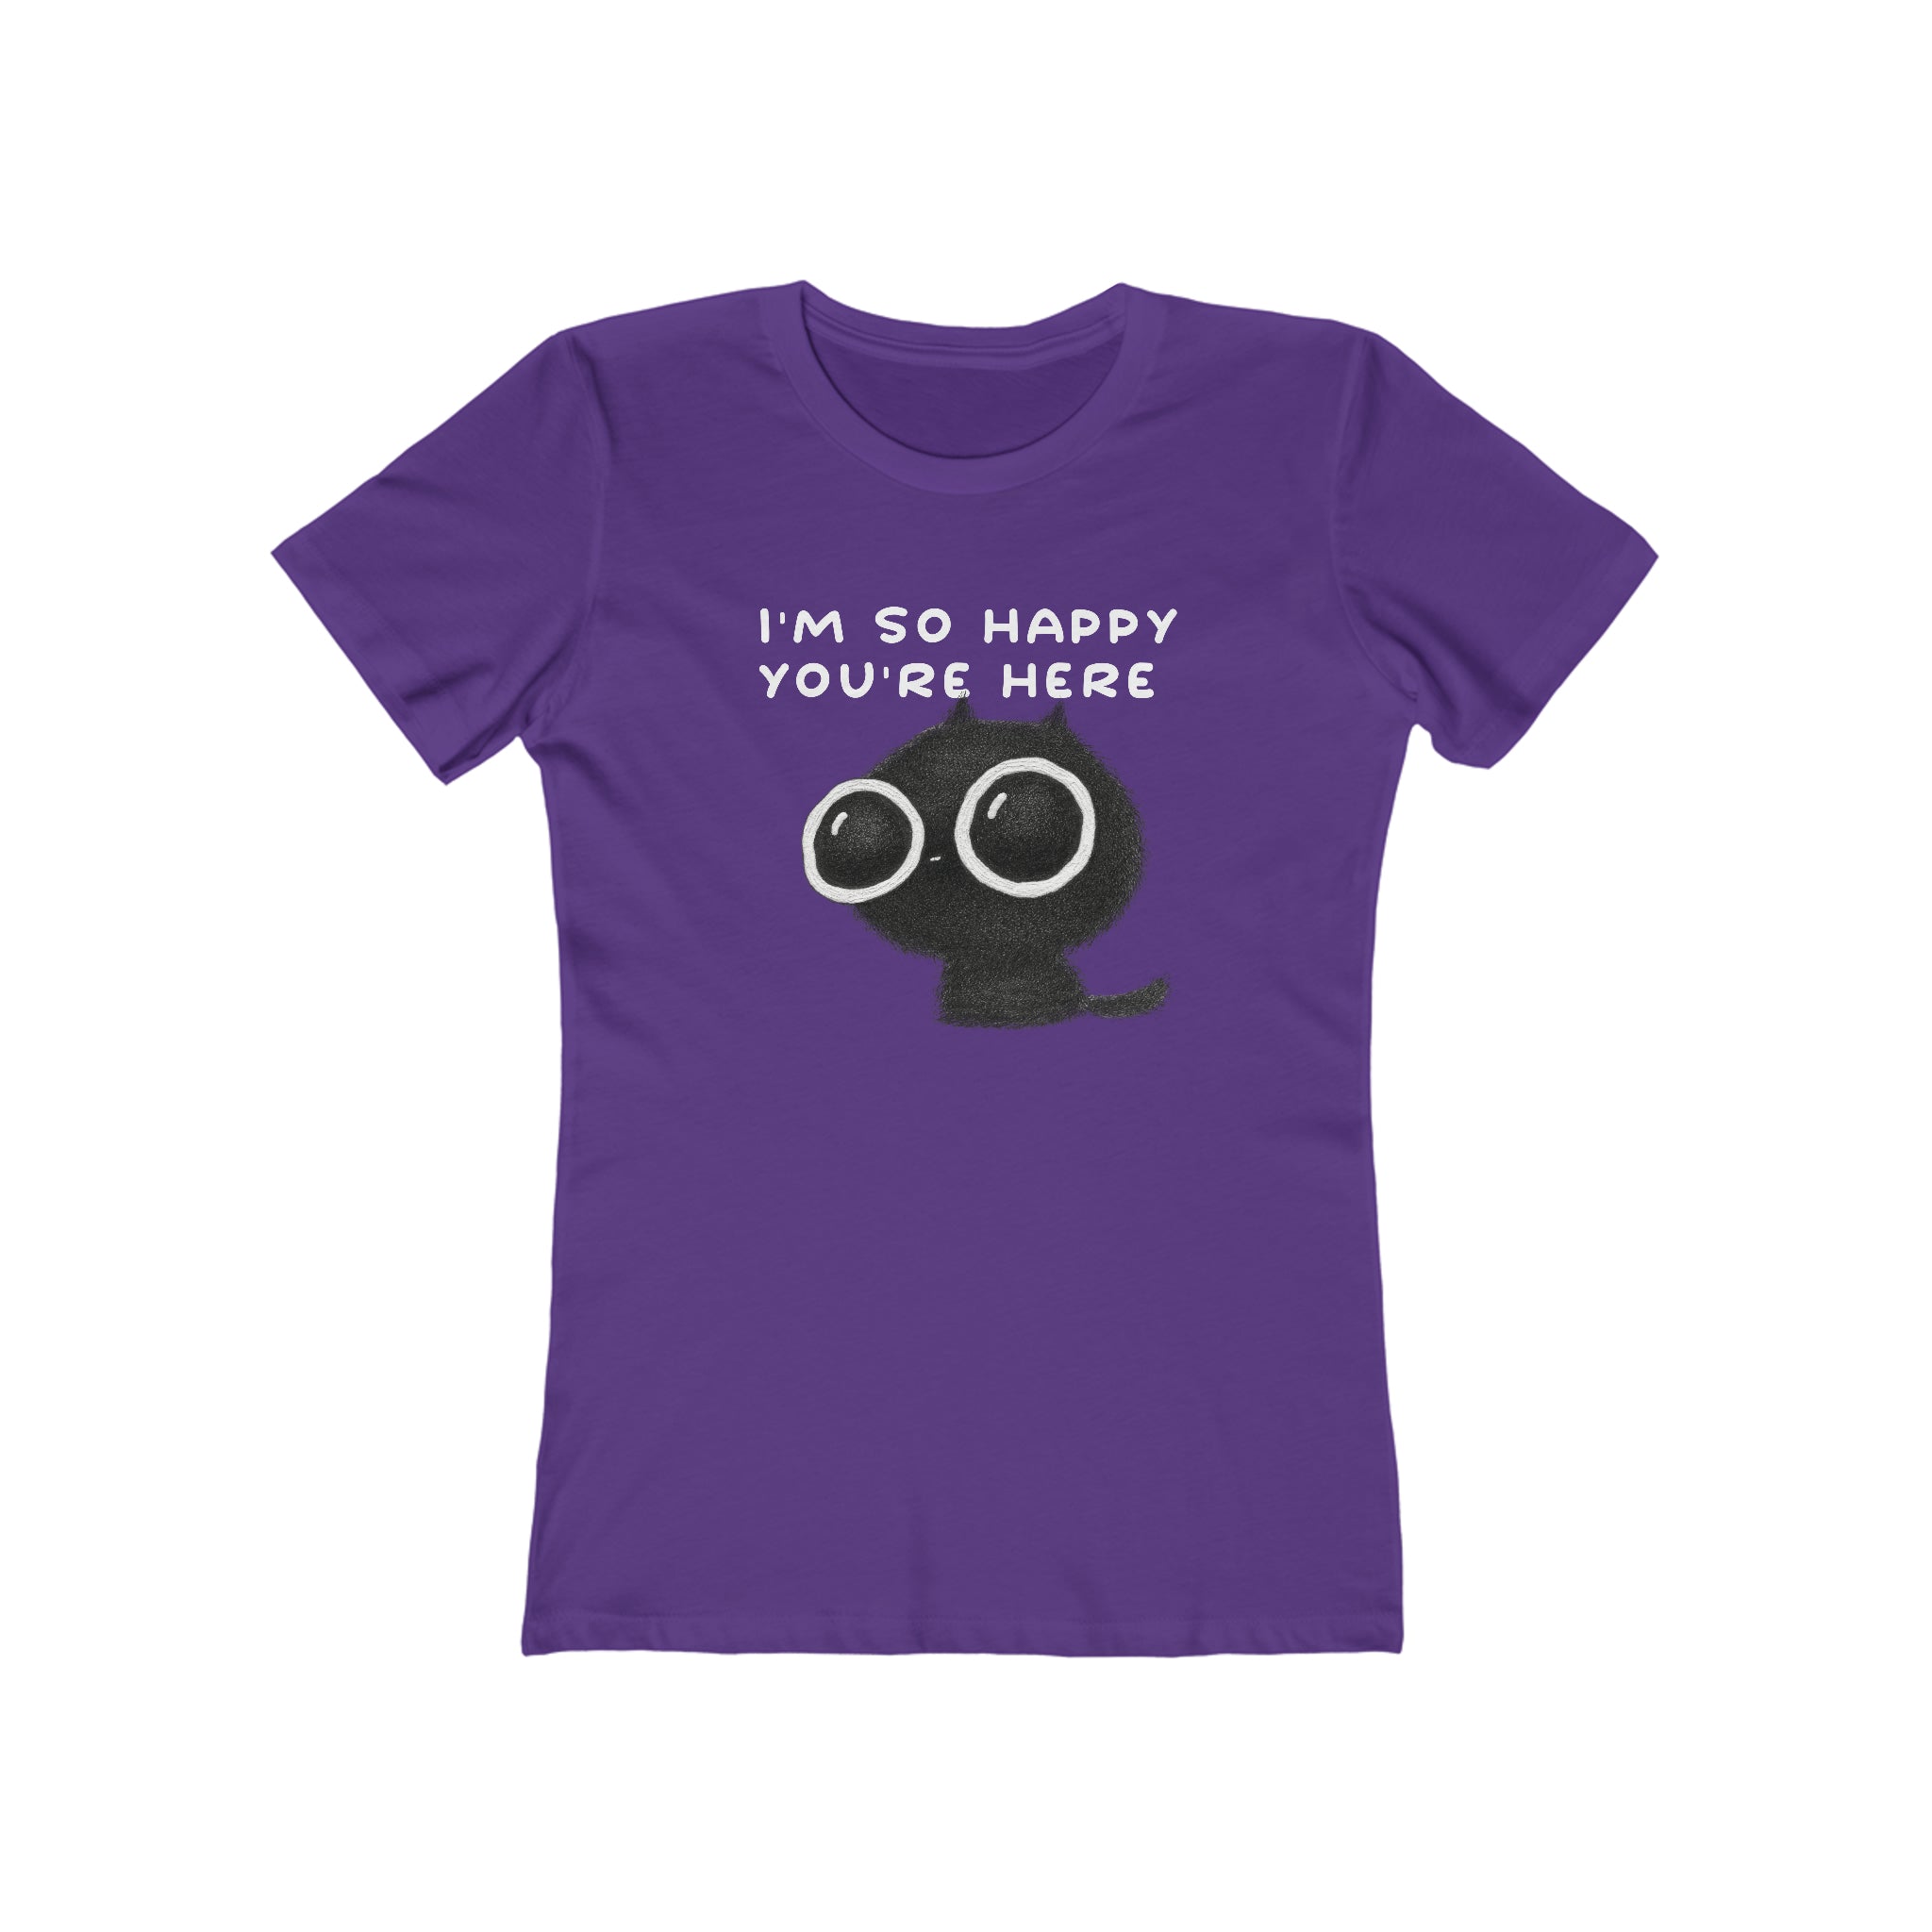 I'm So Happy You're Here : Women's Cotton T-Shirt by Bella+Canvas